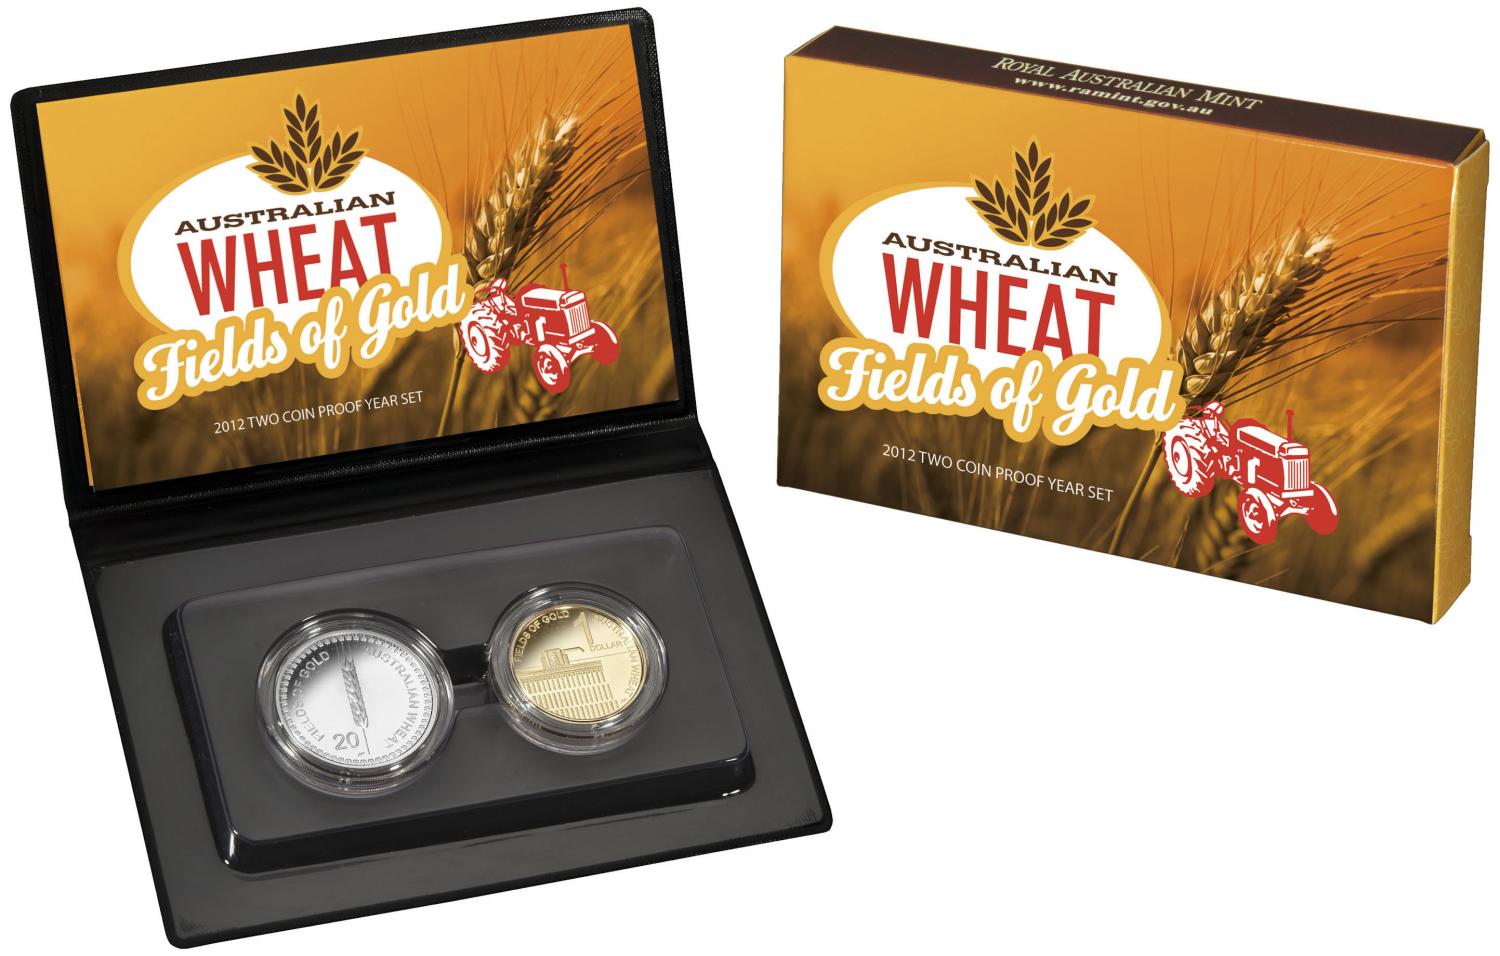 Thumbnail for 2012 Two Coin Proof Set - Australian Wheat Fields of Gold